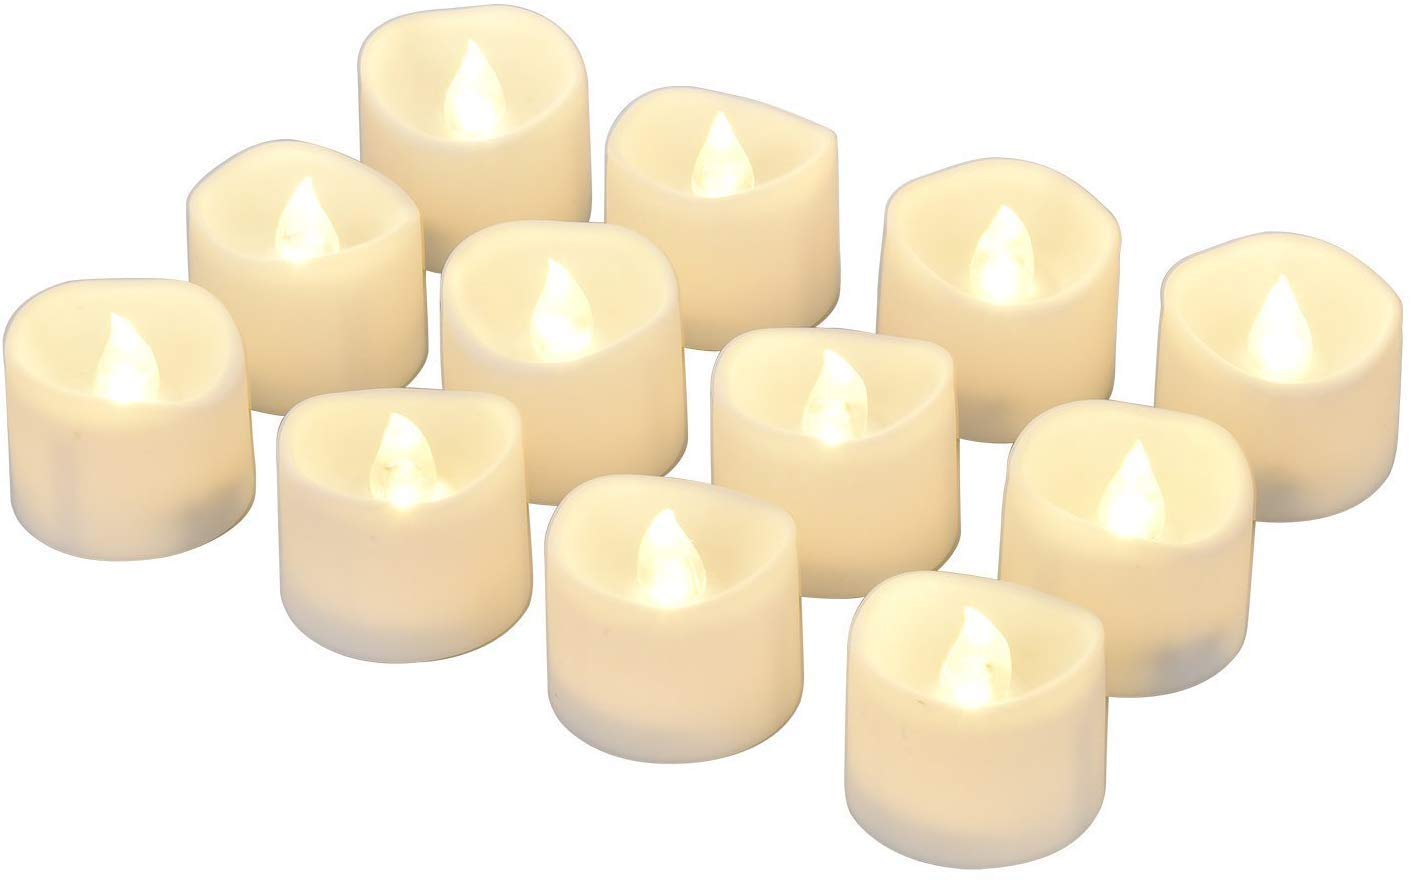 Willingood LED Tea Lights Flameless Candle with Timer, 6 Hours on and 18 Hours Off, 1.4 x 1.3 Inch, Warm White, [12 Pack]